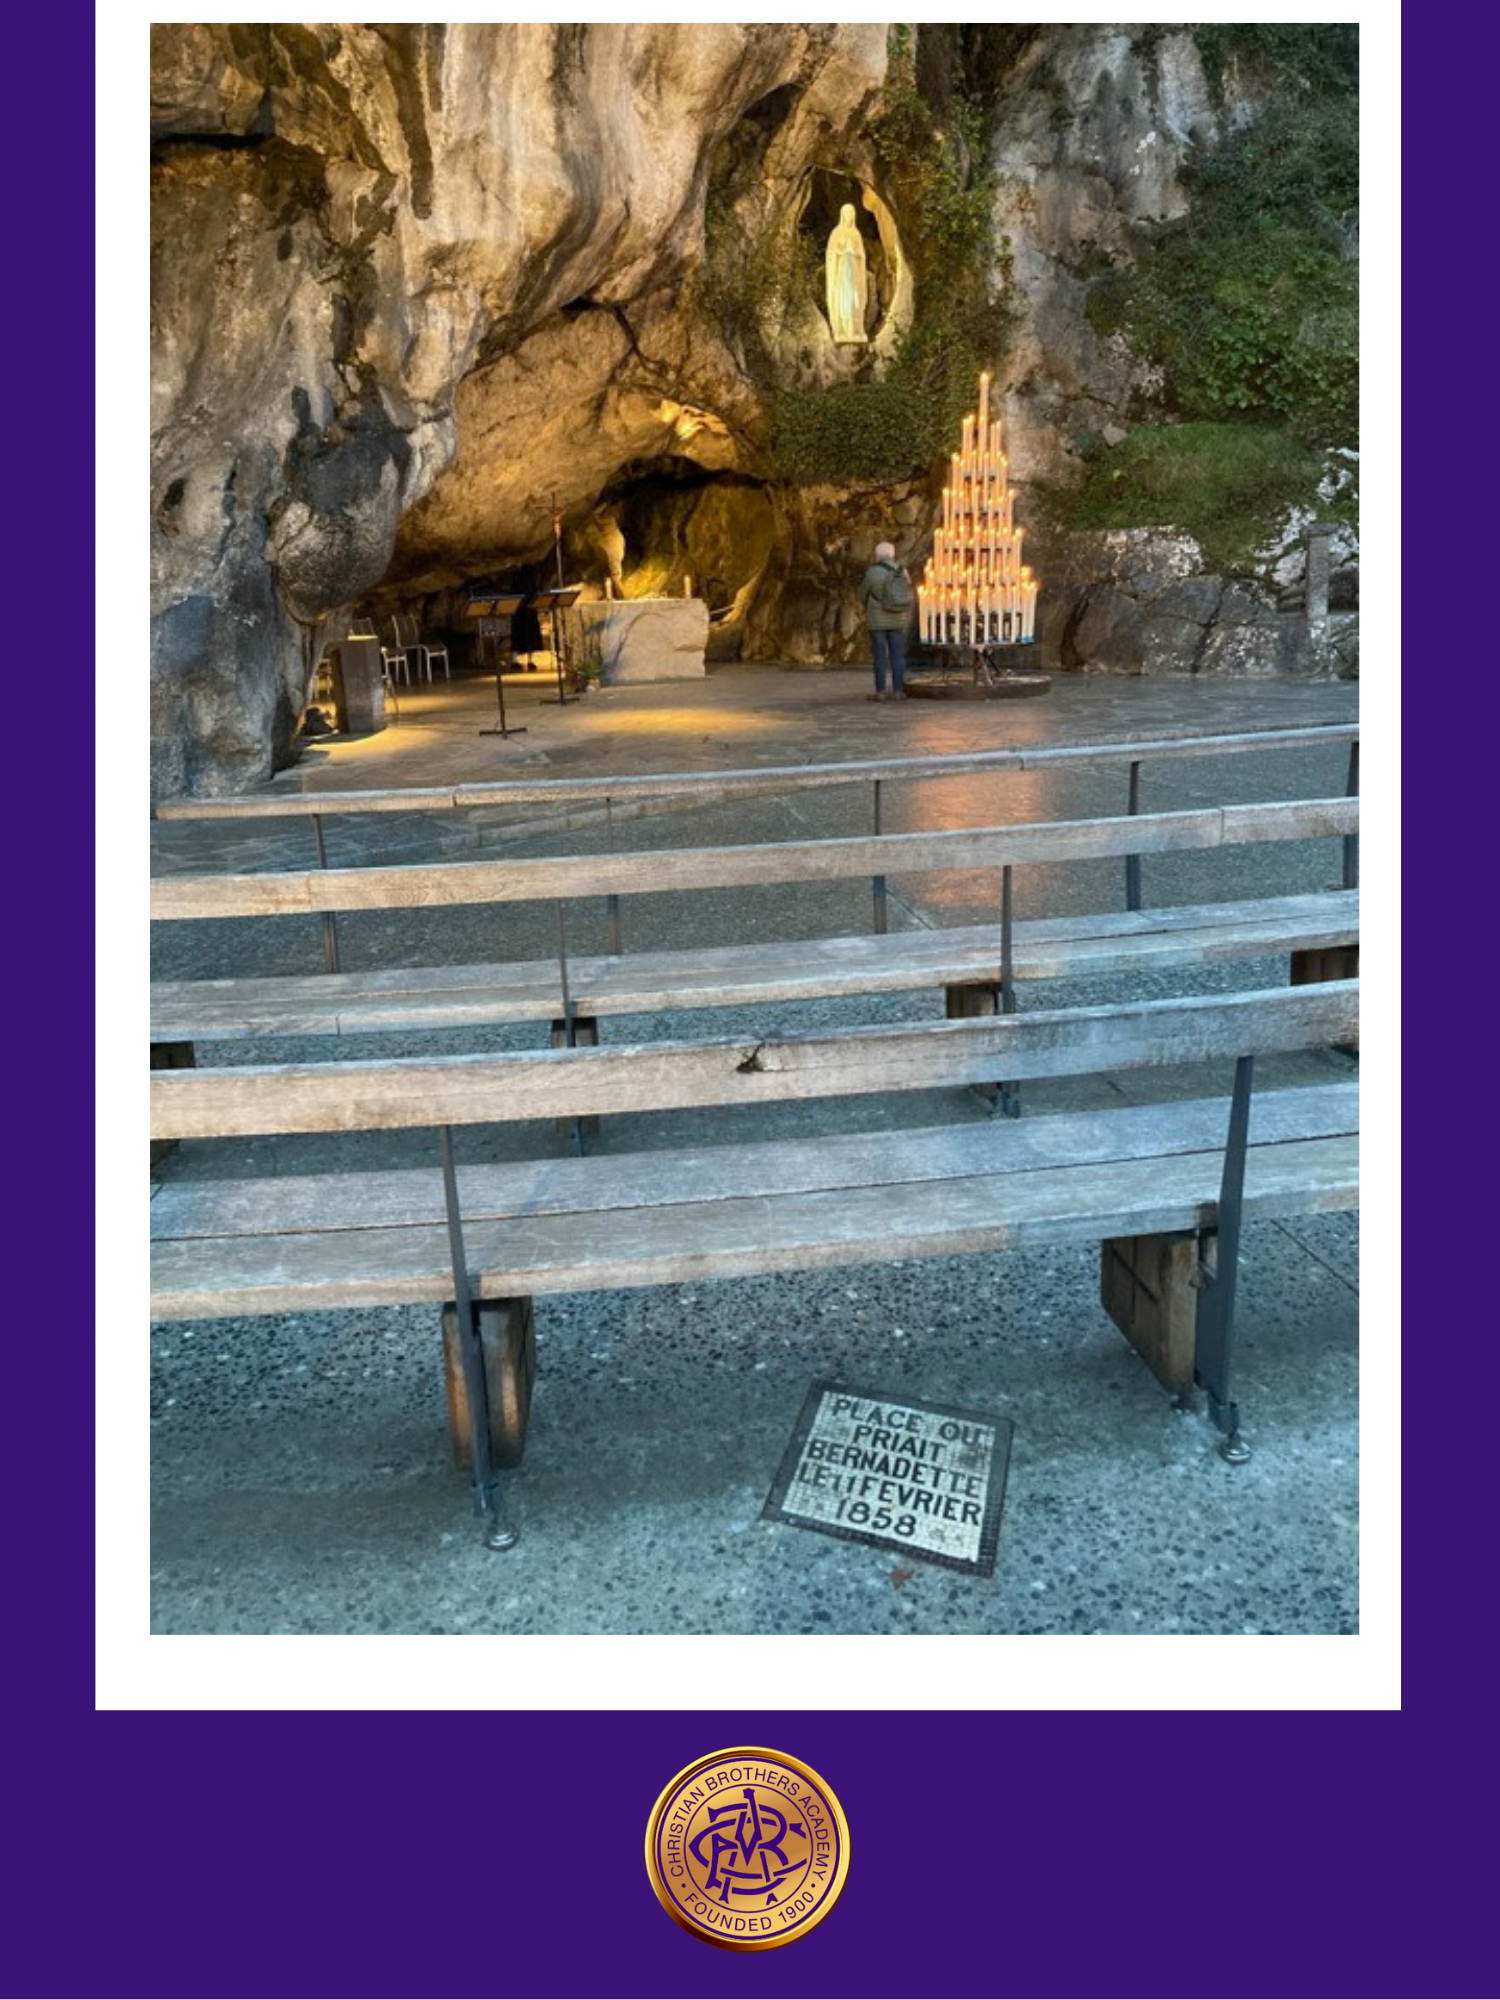 Christian Brothers Academy in Syracuse, NY alumni visits Lourdes and the Grotto de Massabielle in Lourdes, France.